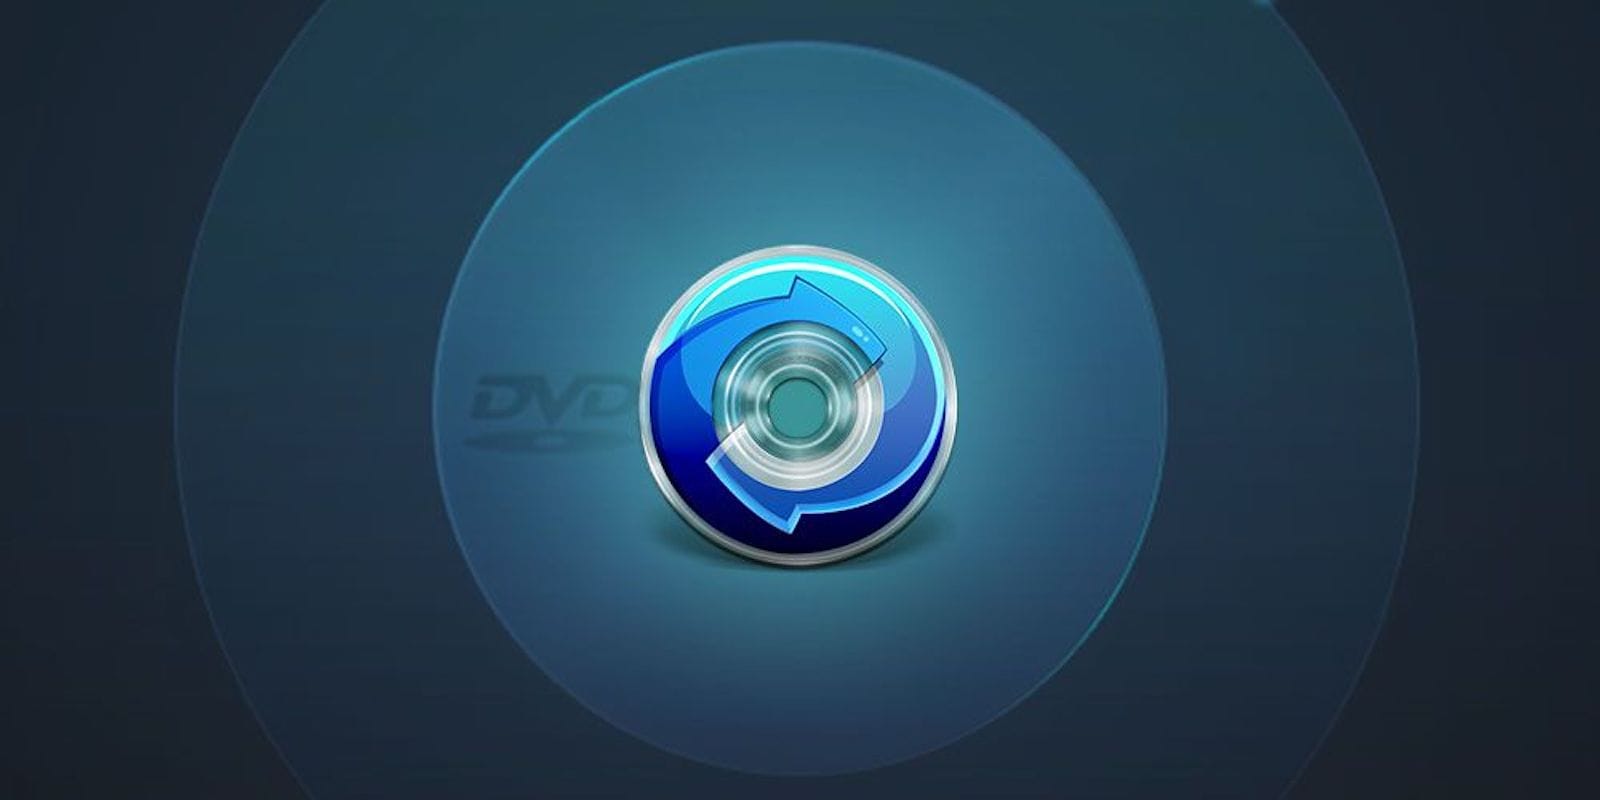 Make your old DVDs useful again with this fast, easy converter.